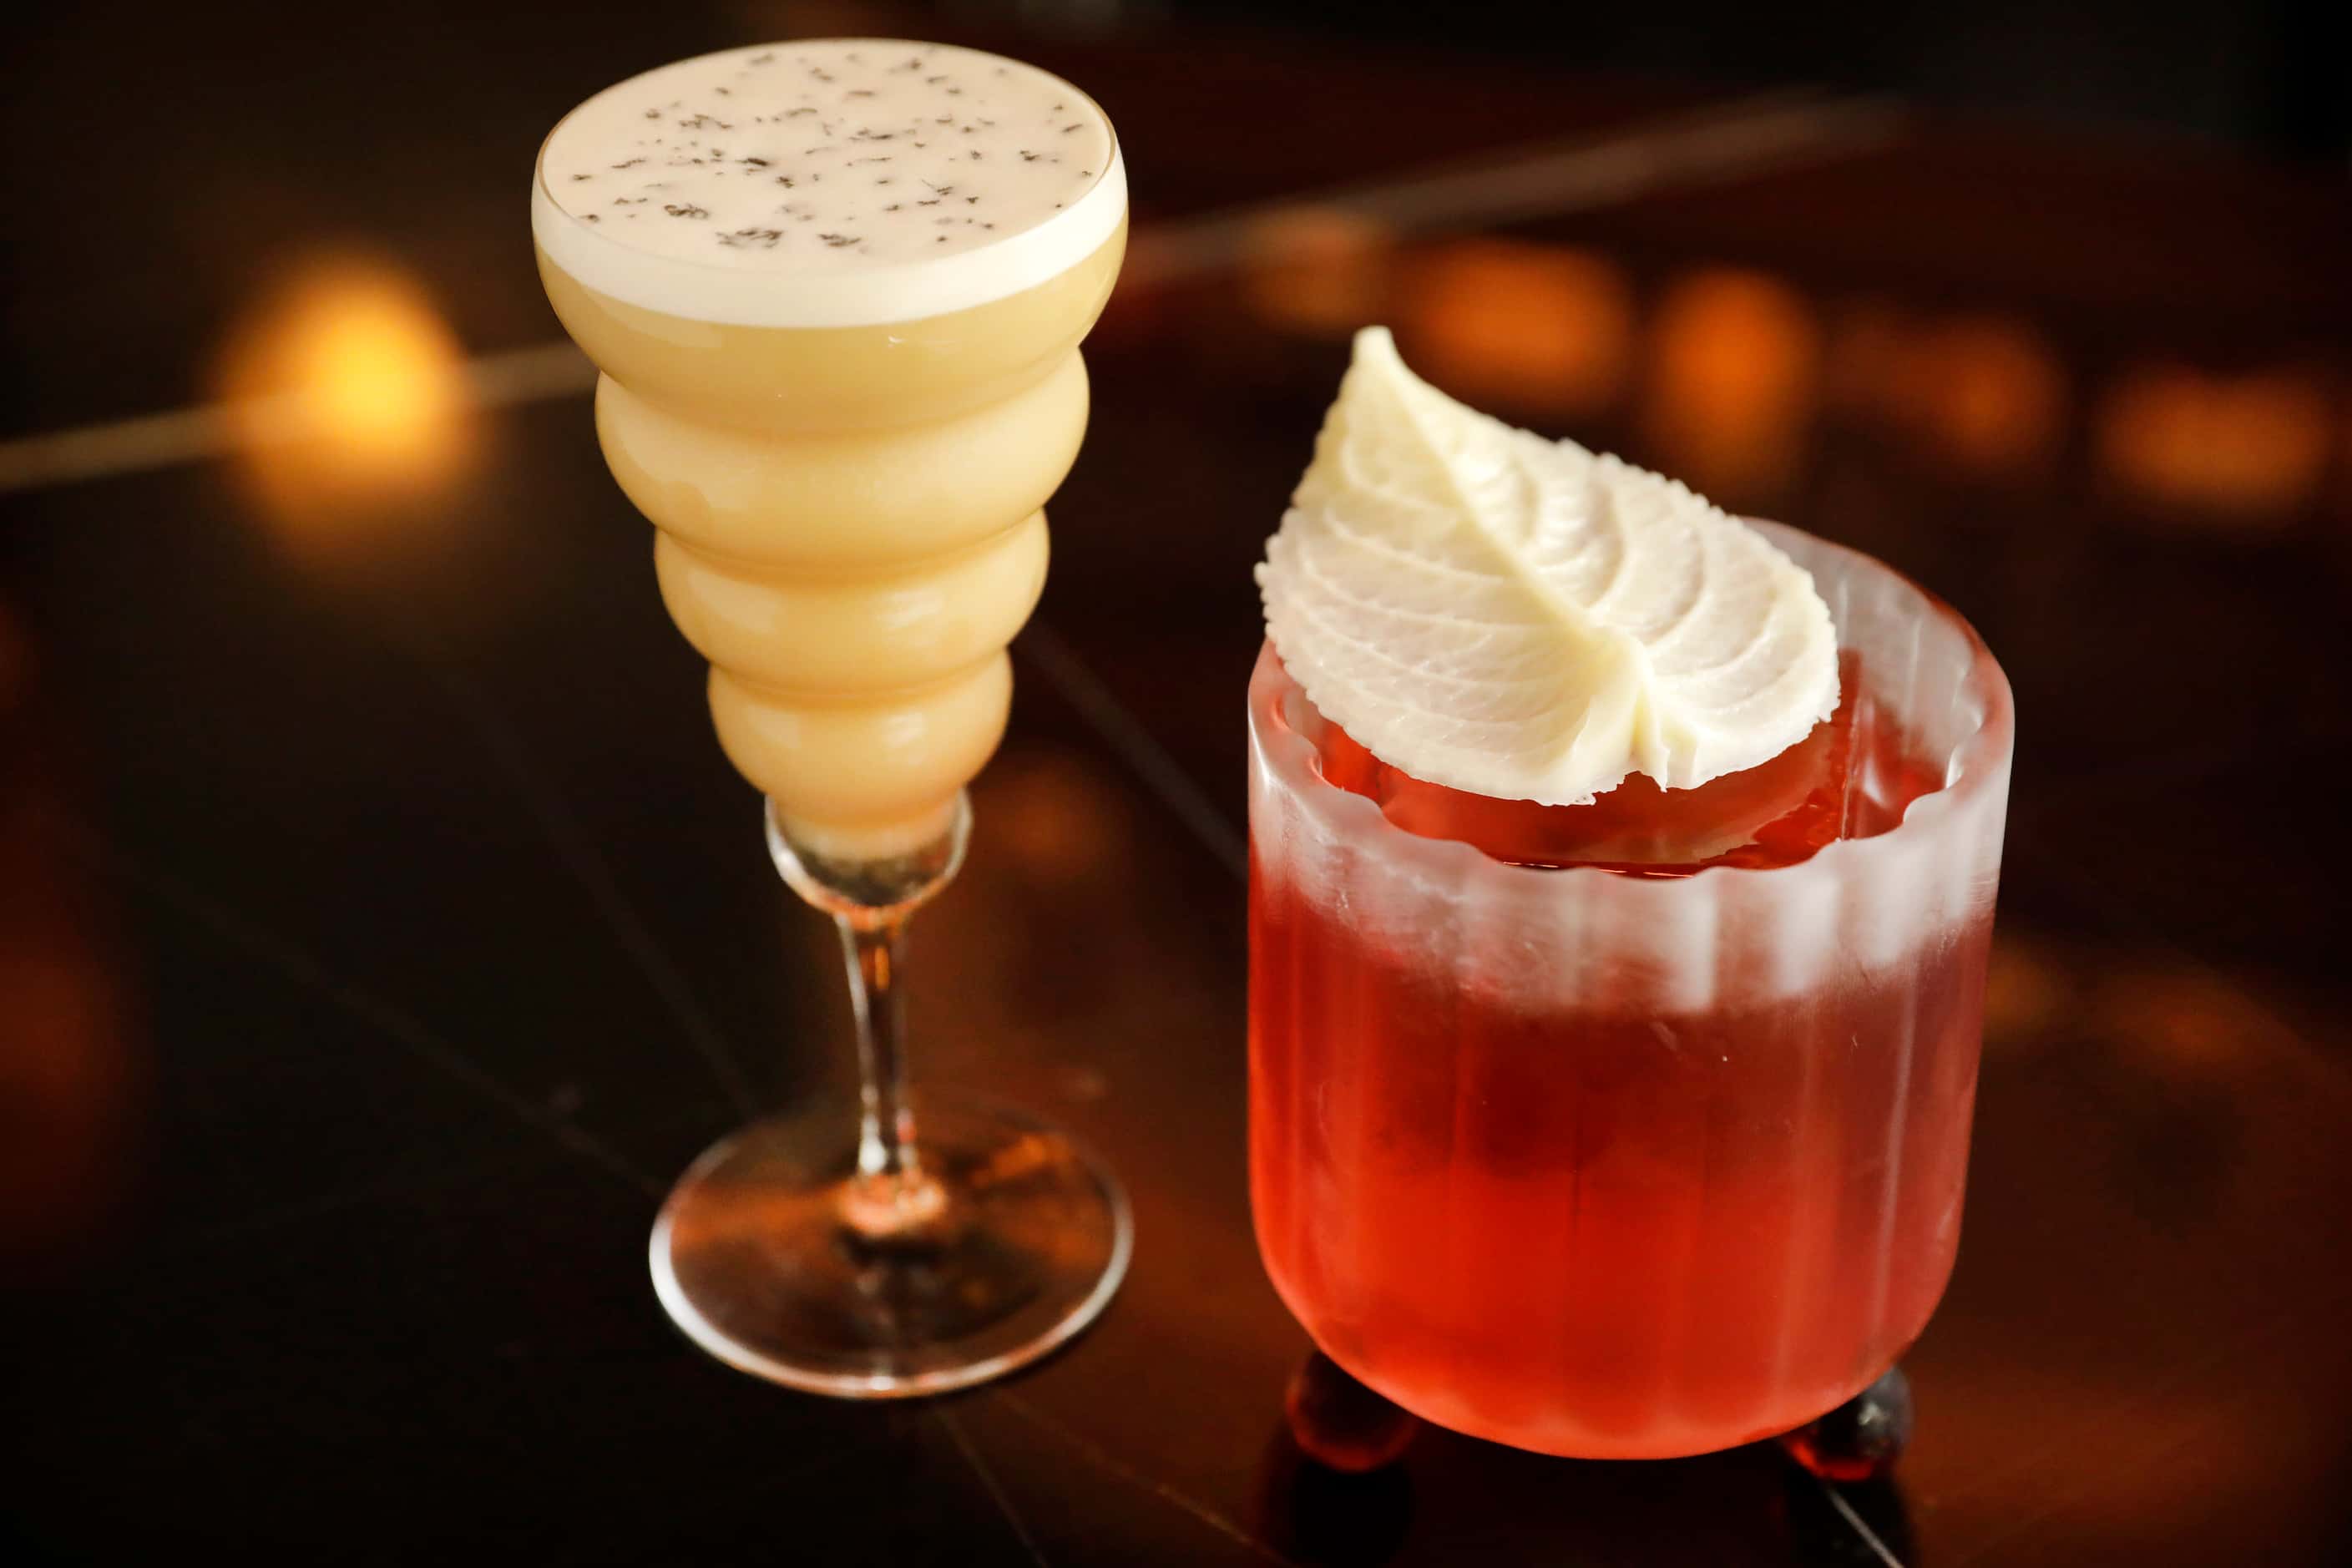 Bar Colette's drinks include the Carrot Cake drink (left), made with bonded rye, cream...